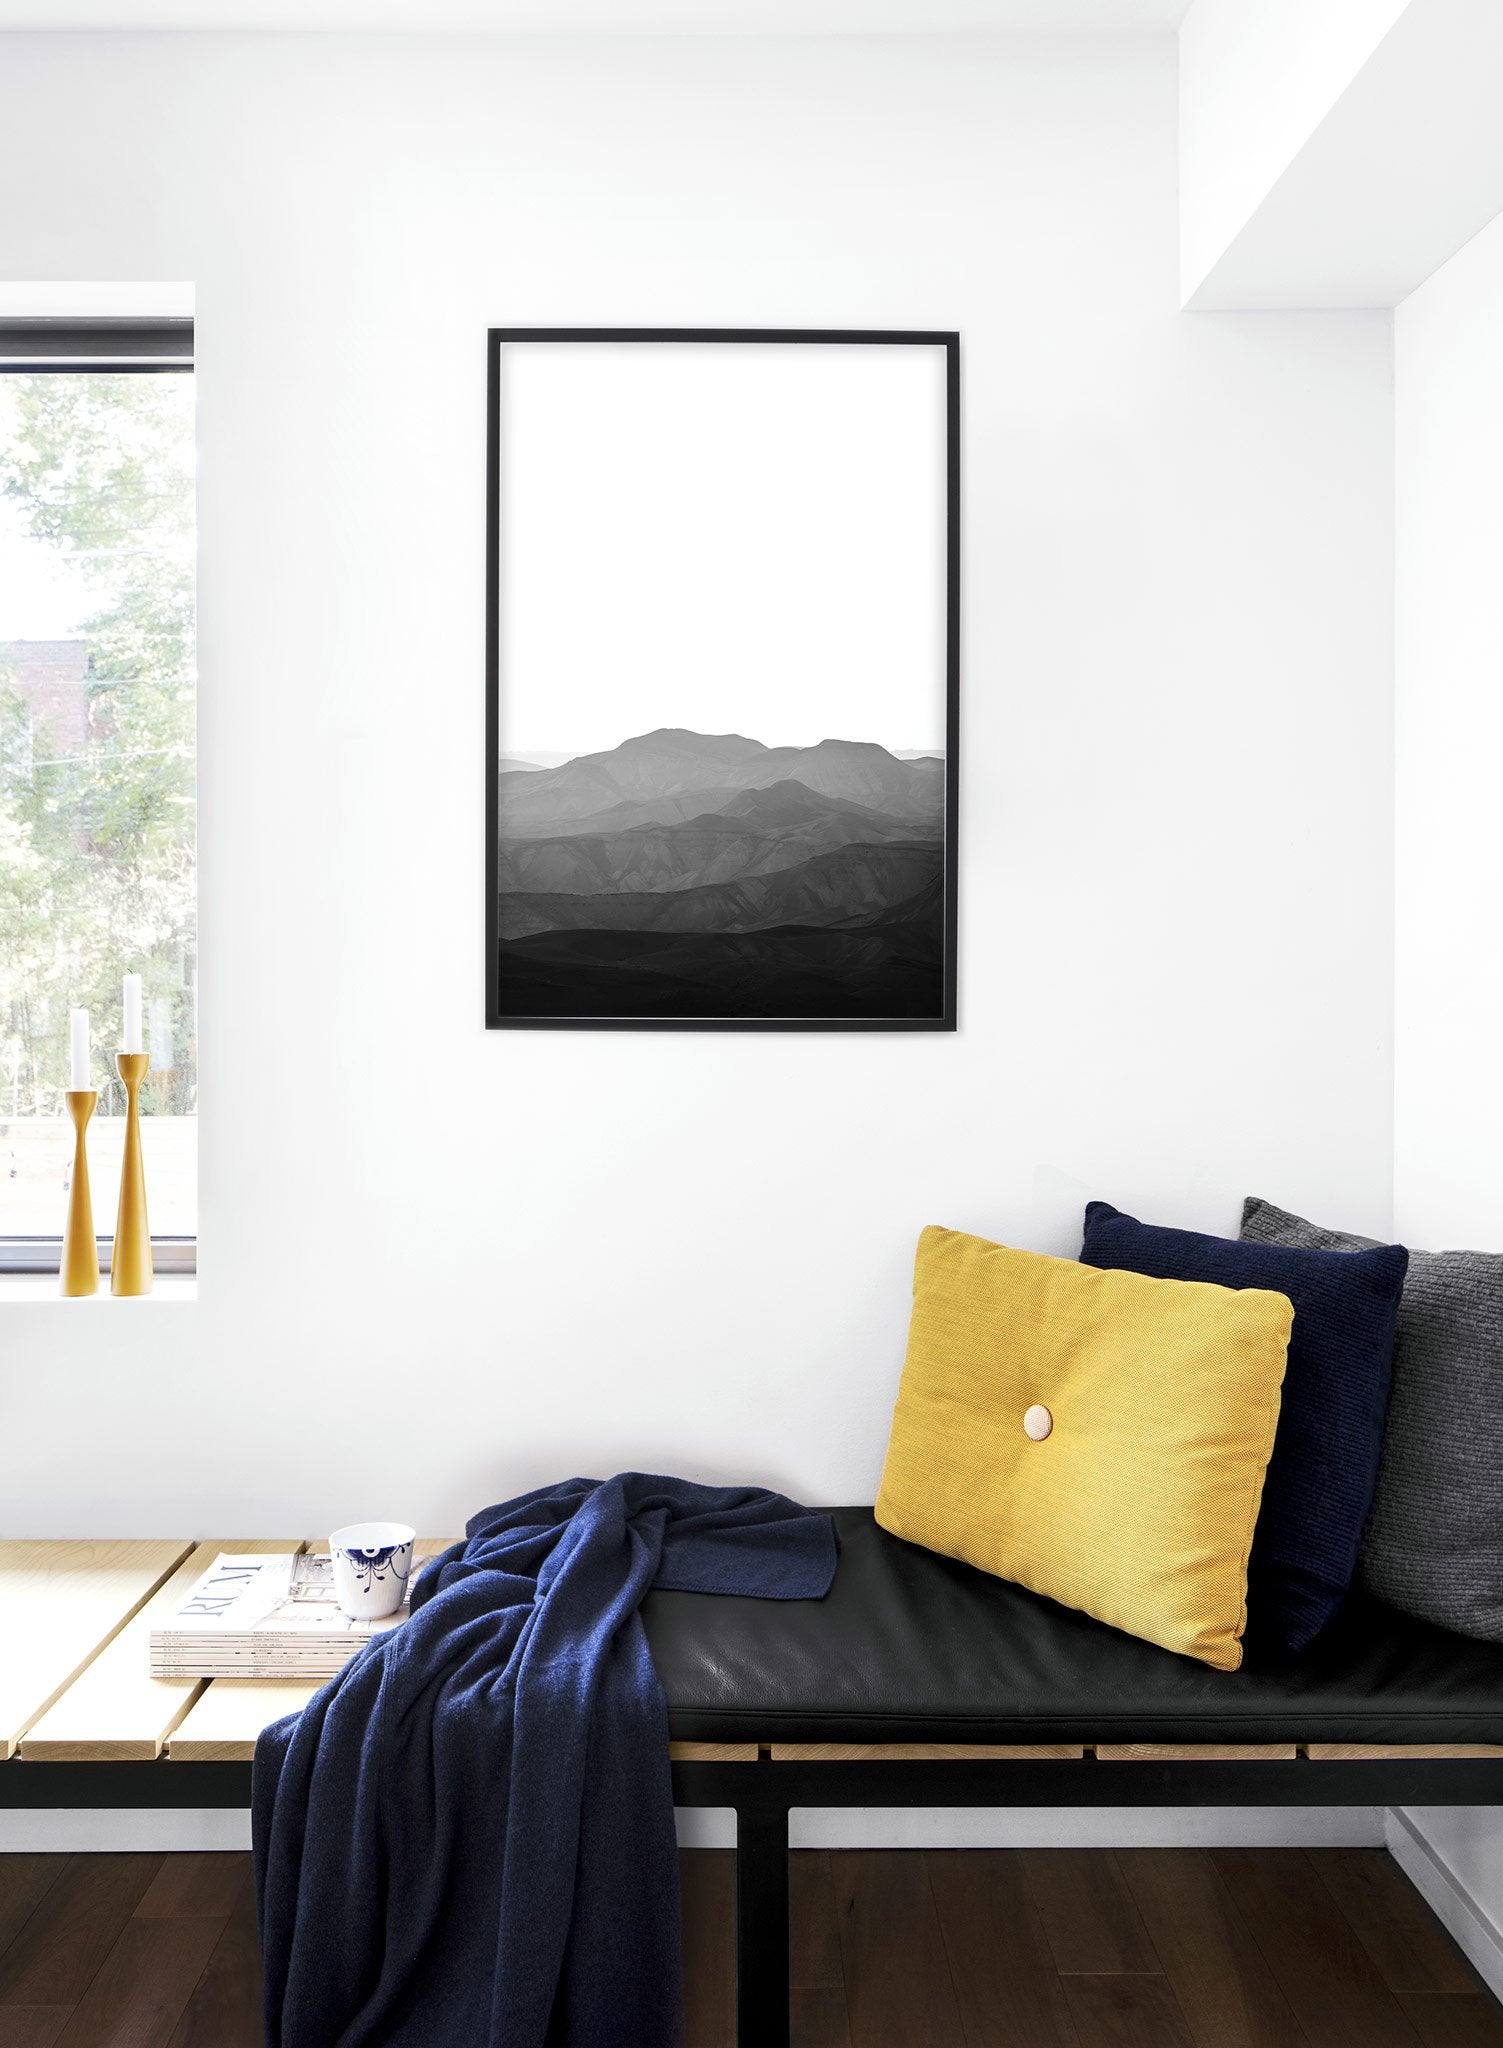 Modern minimalist poster by Opposite Wall with black and white landscape photography of mountain range - Lifestyle - Bedroom